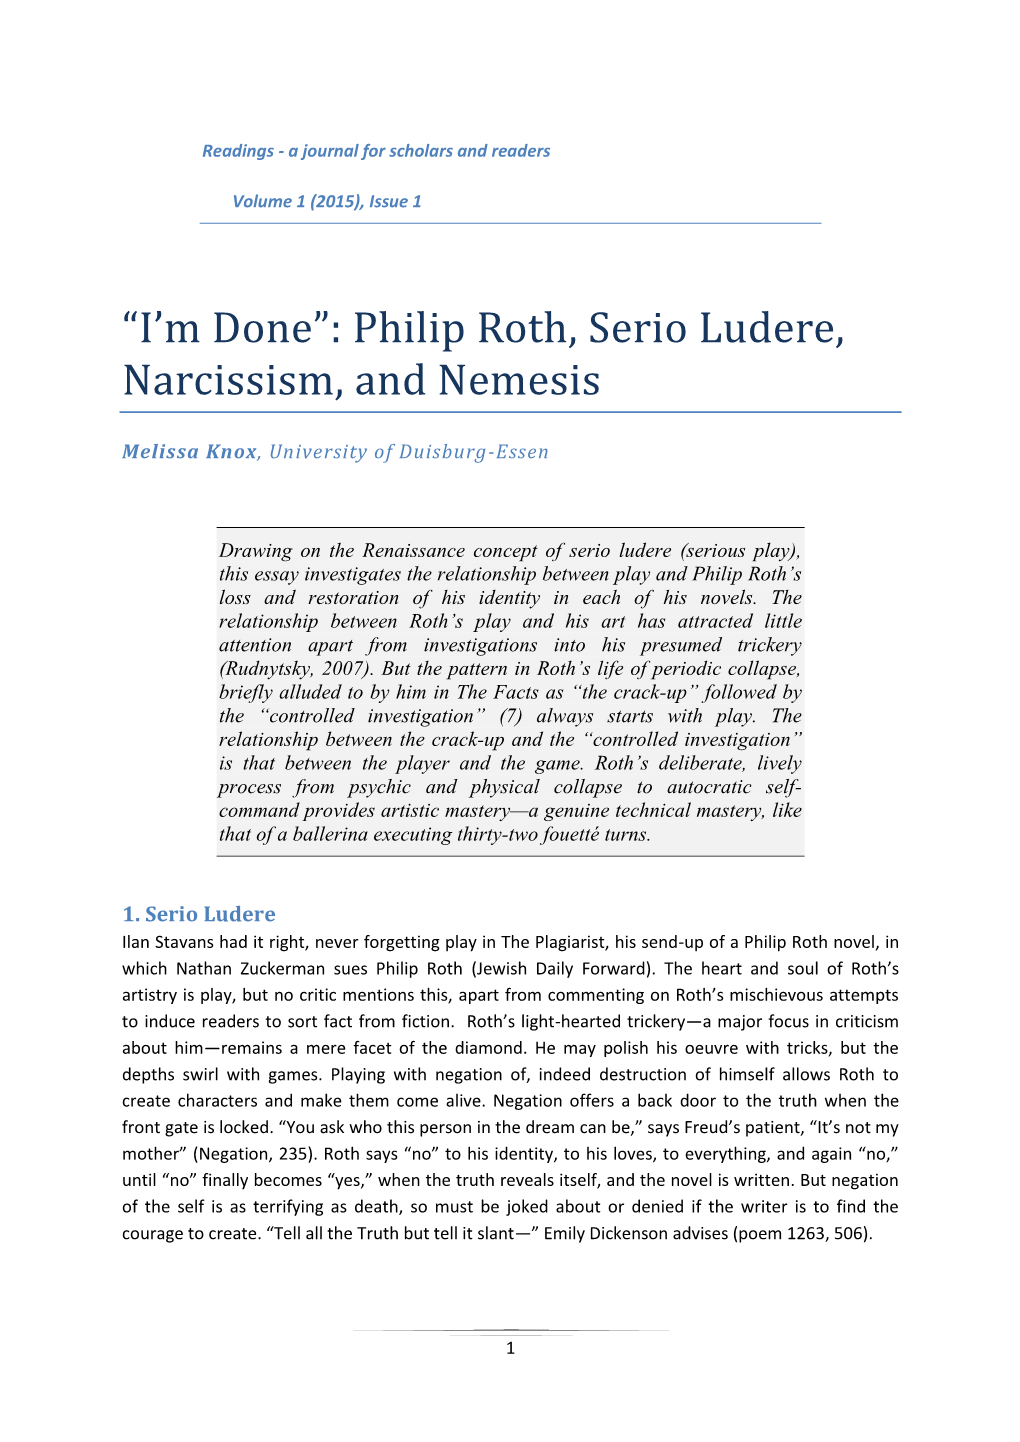 “I'm Done”: Philip Roth, Serio Ludere, Narcissism, and Nemesis